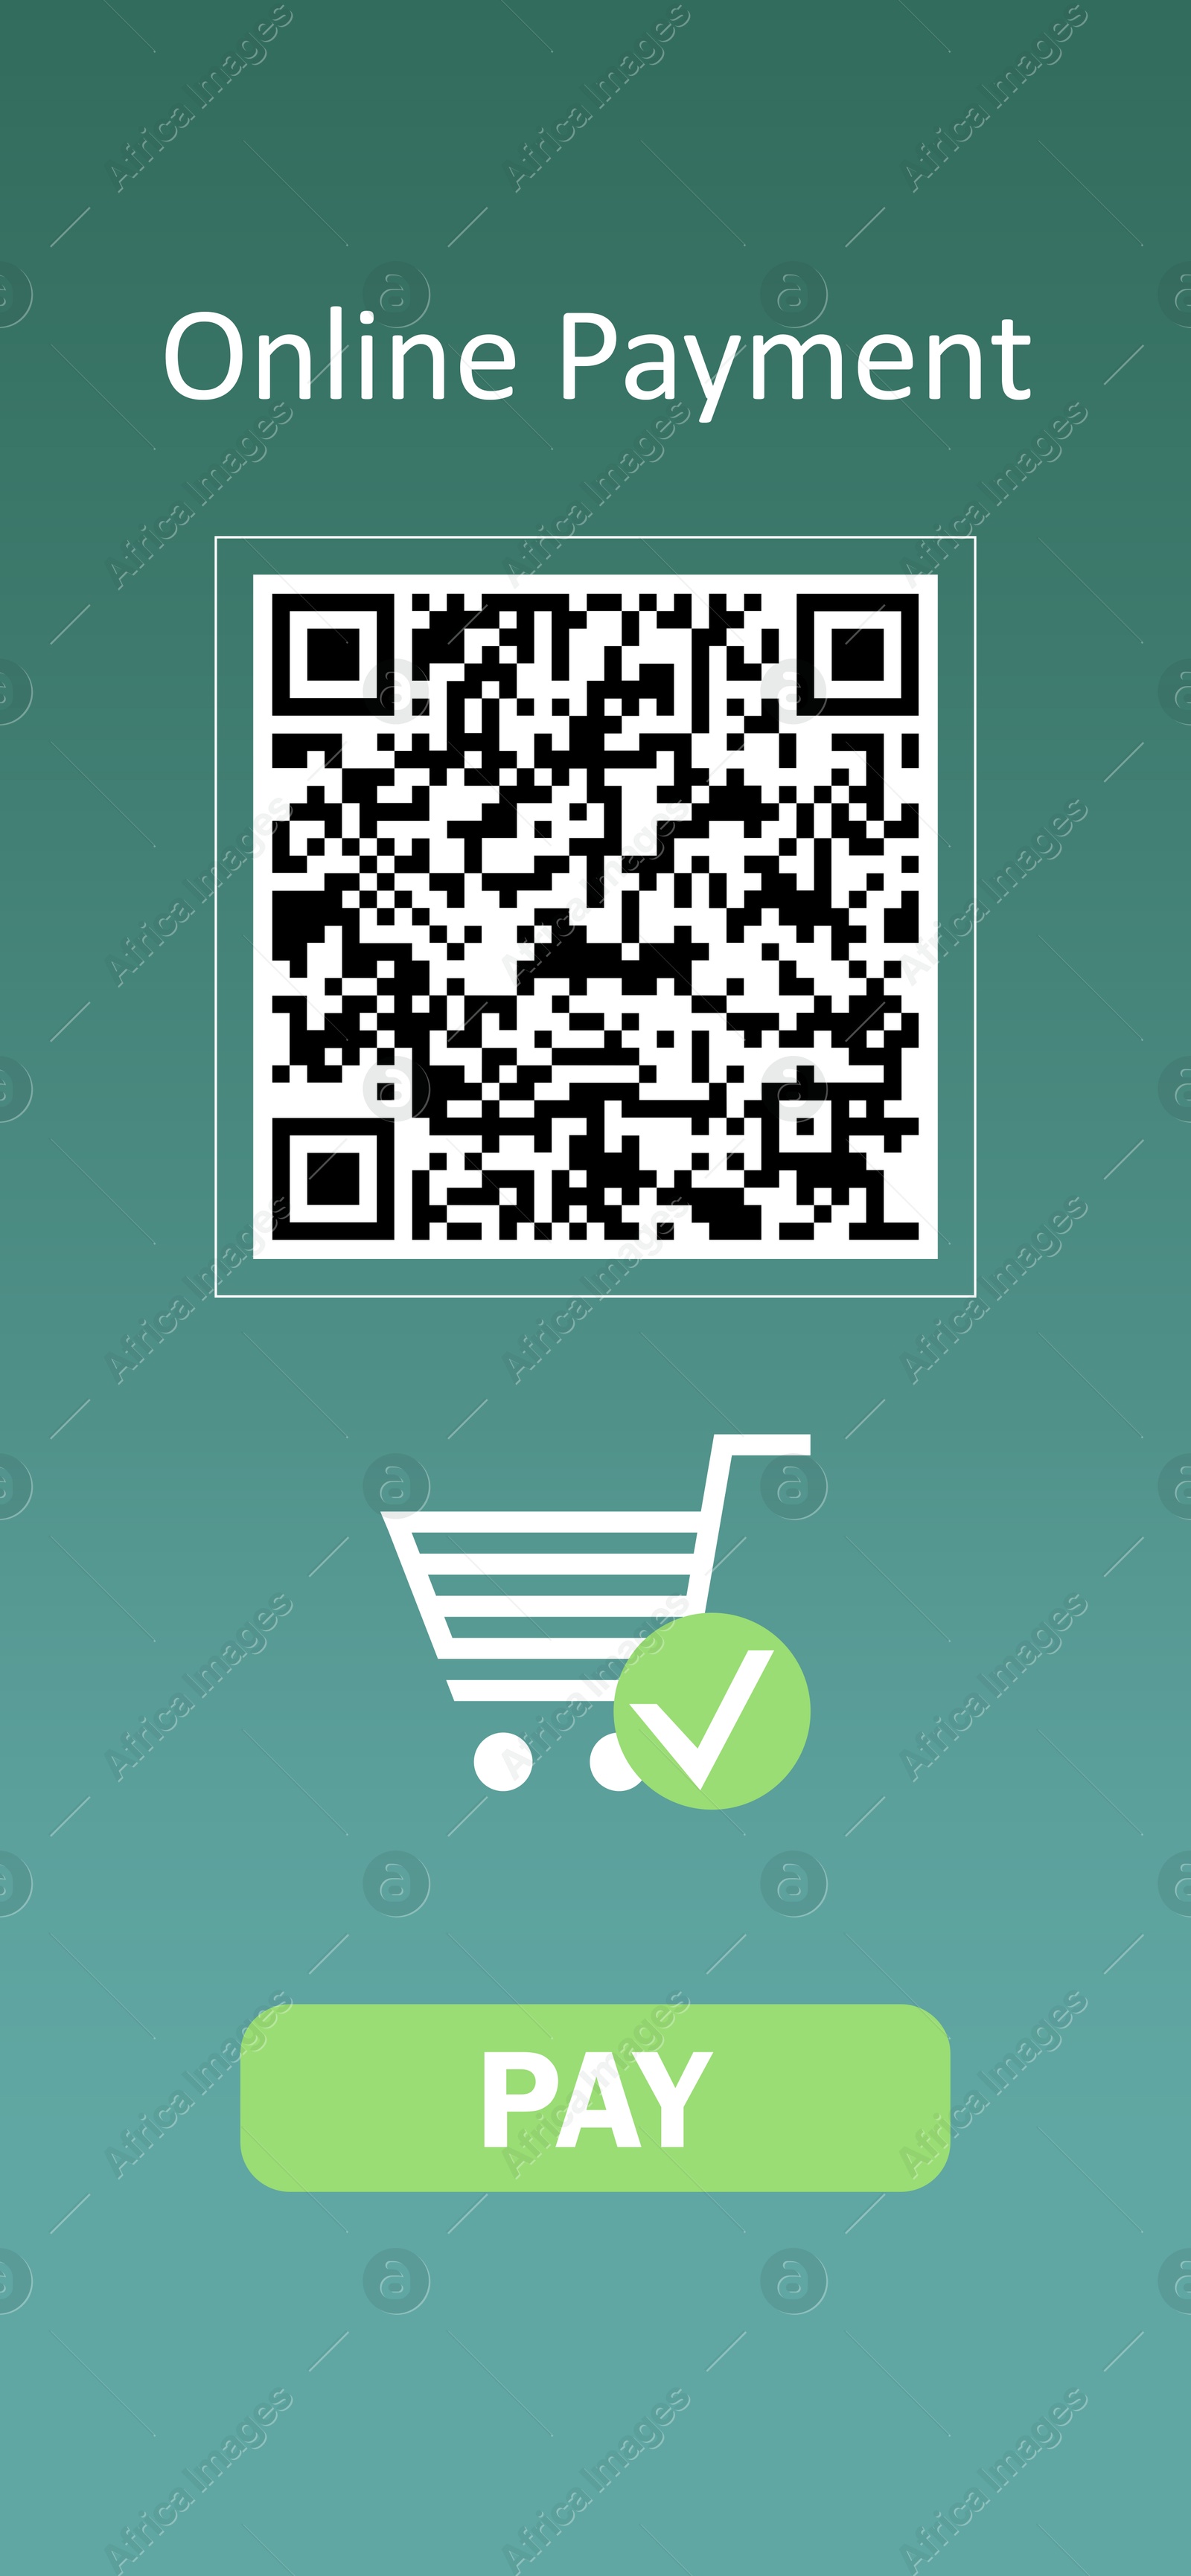 Image of Online payment application screen showing QR code, shopping card and Pay button on teal background, illustration